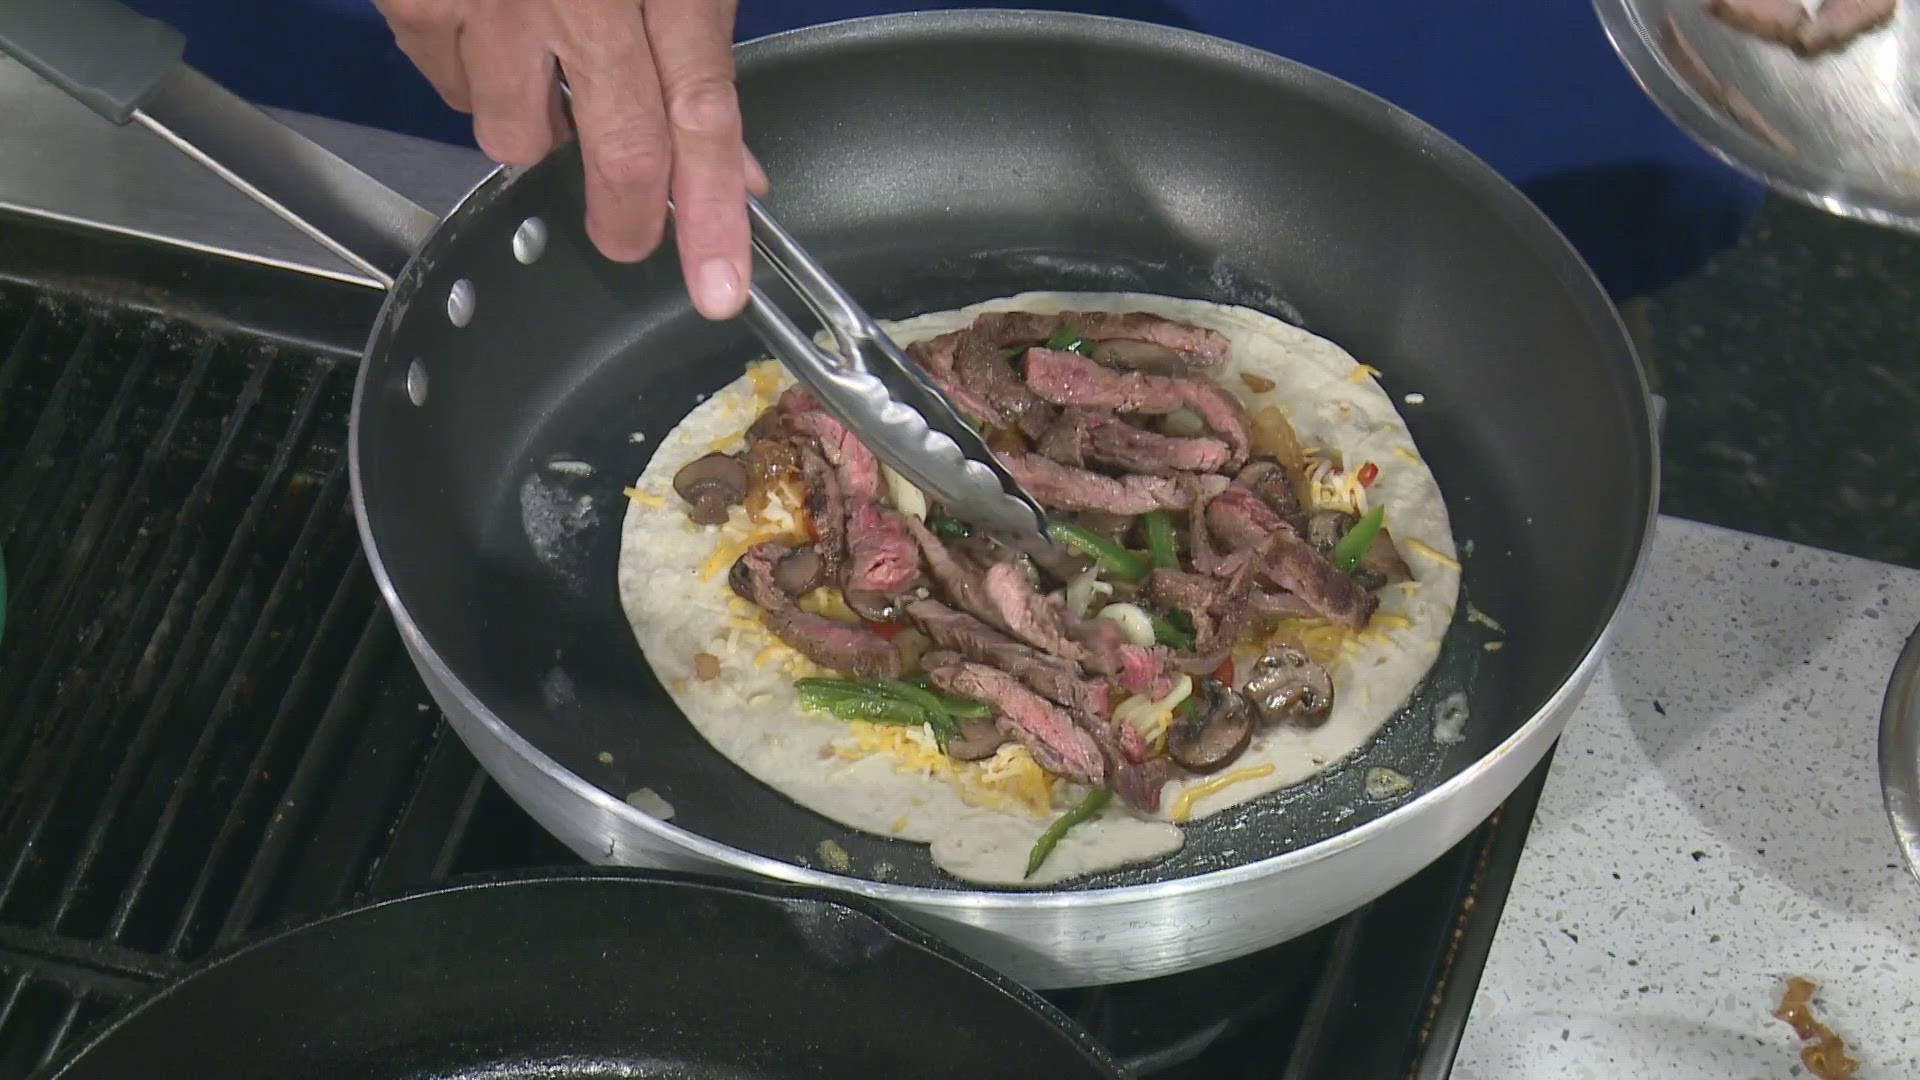 Chef Kevin Belton is in the WWLTV kitchen cooking steak quesadillas.